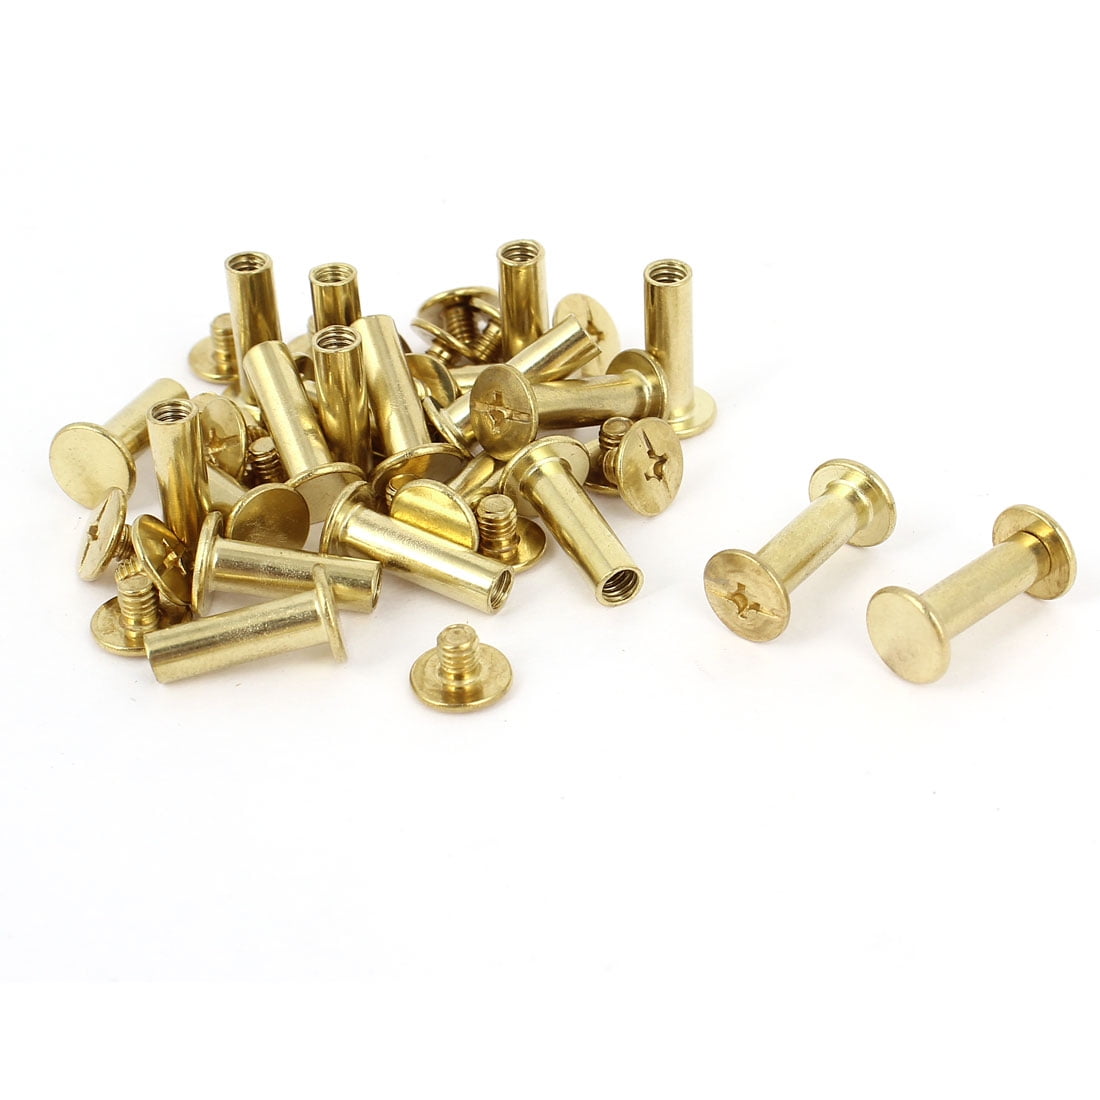 uxcell Leather Scrapbook 5x30mm Brass Plated Binding Chicago Screw Post 30pcs a15042100ux0732